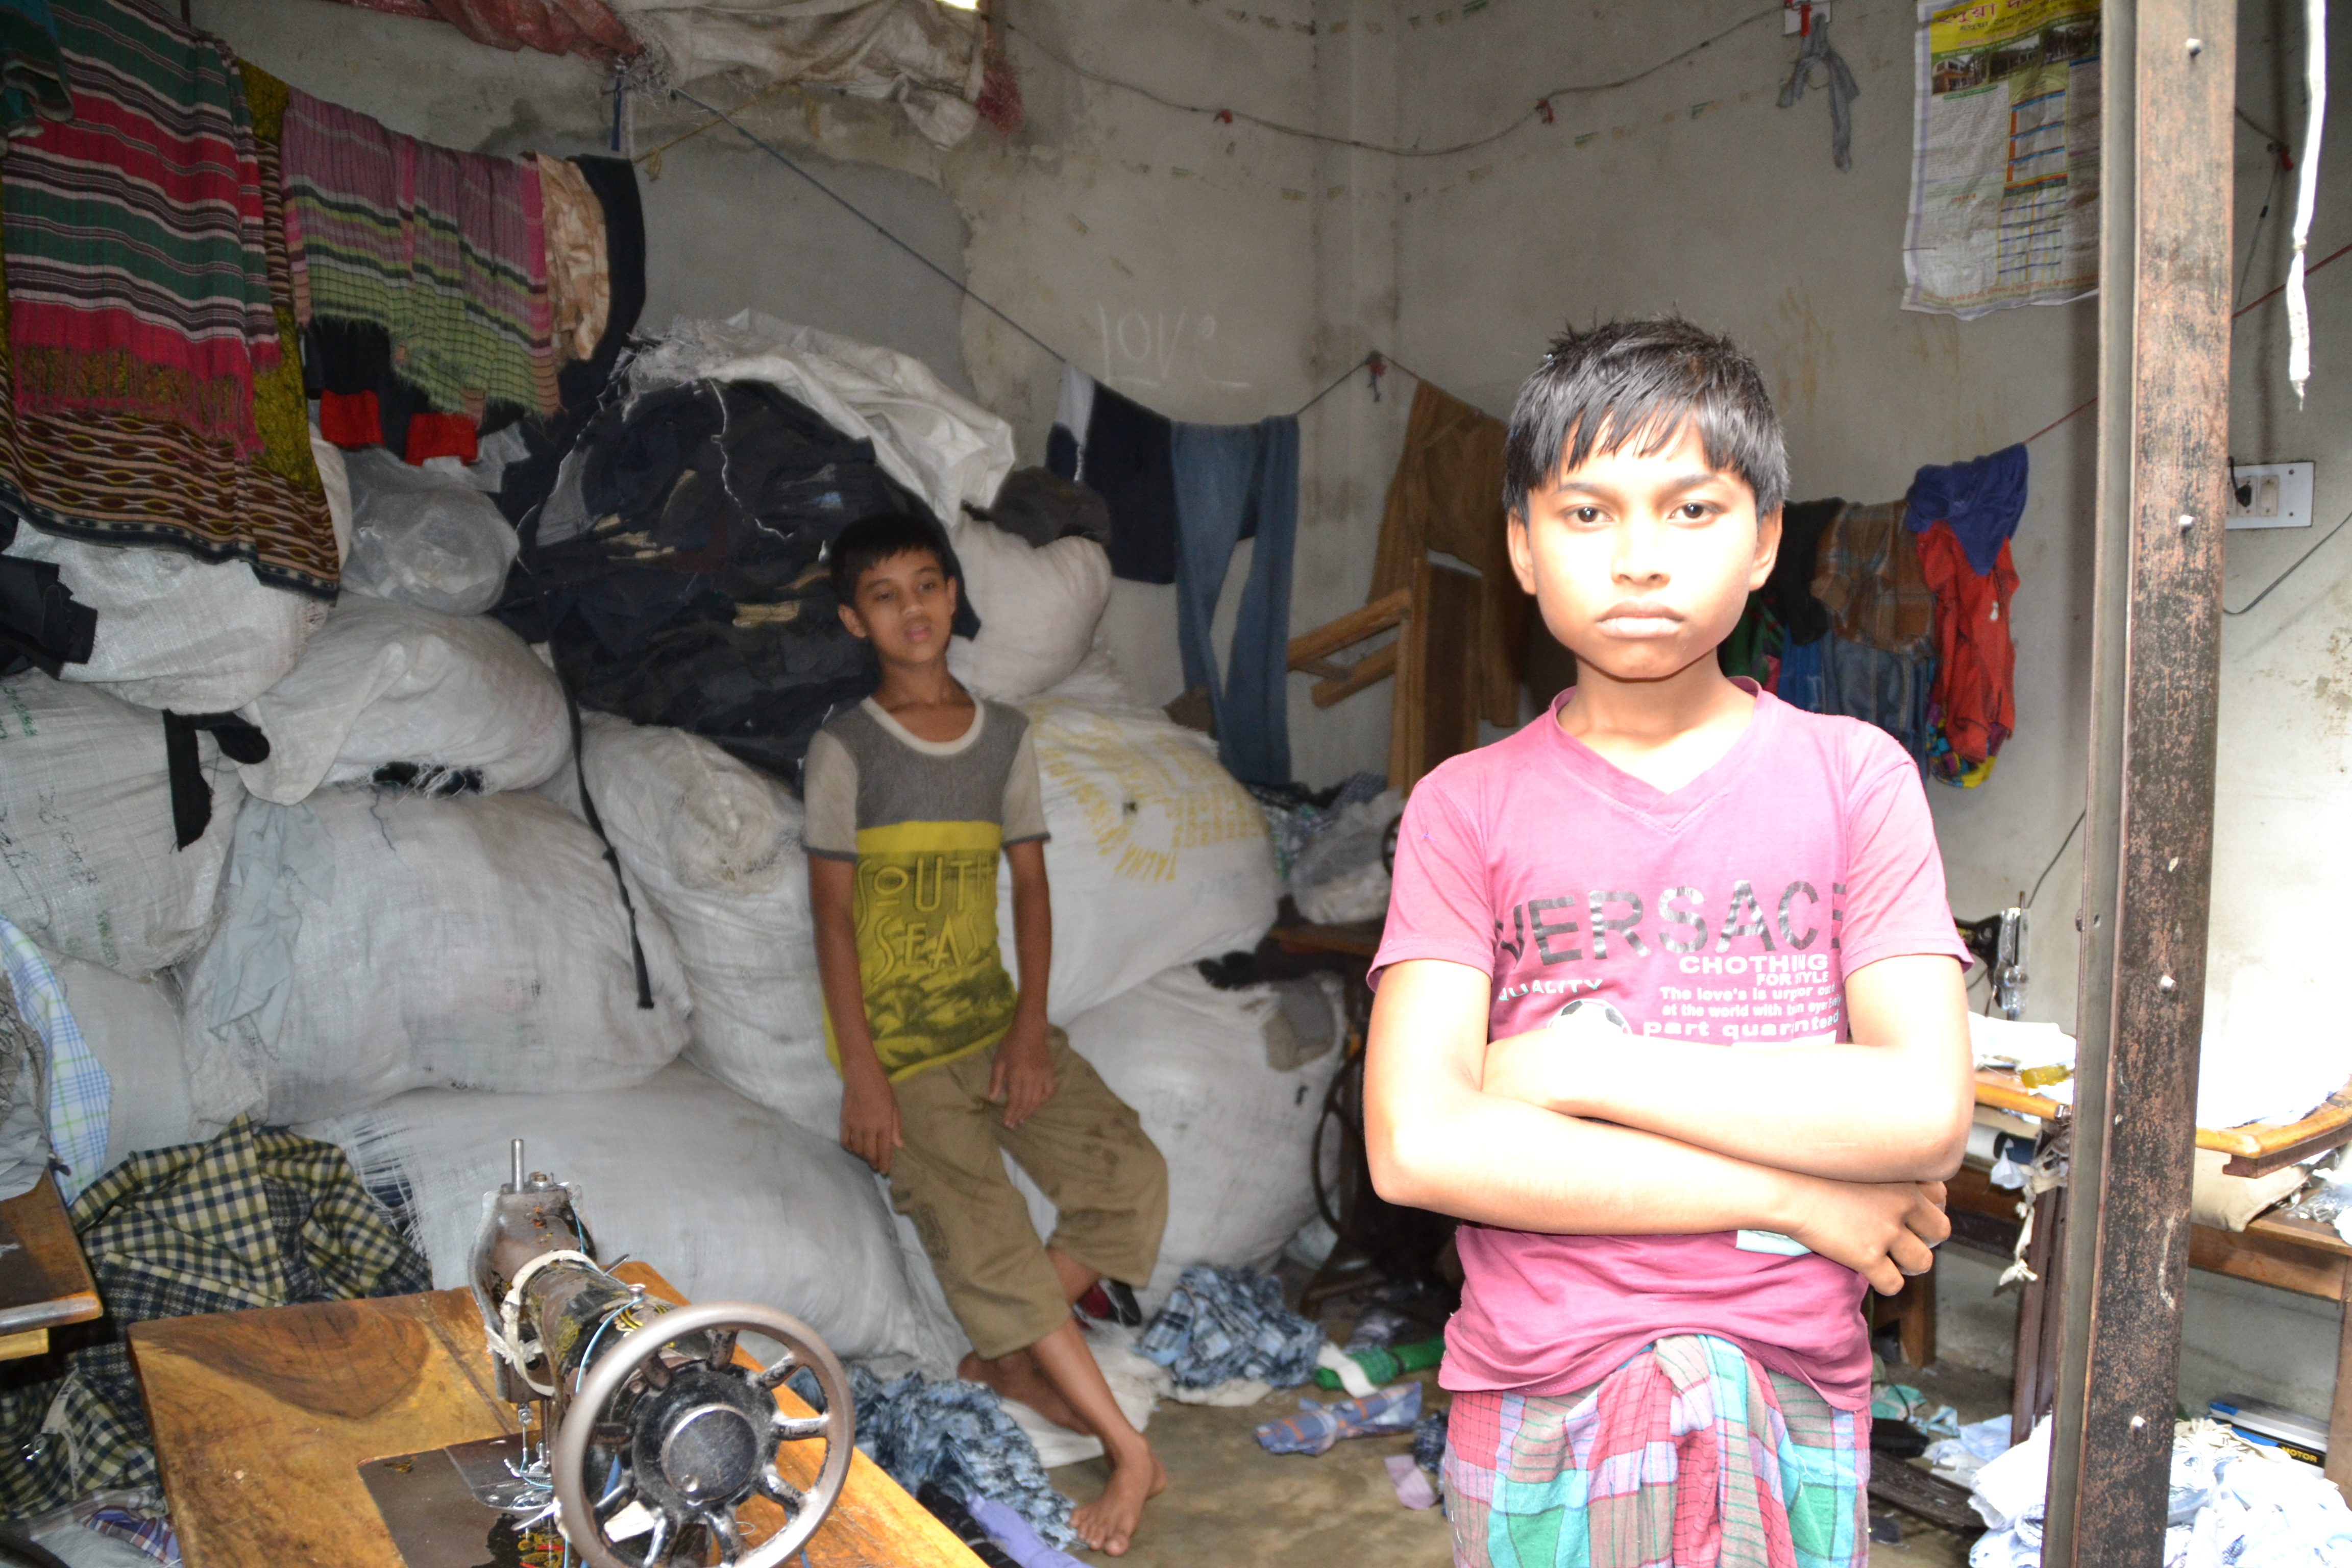 Garment brands contribute to low wages & child labour in Bangladesh